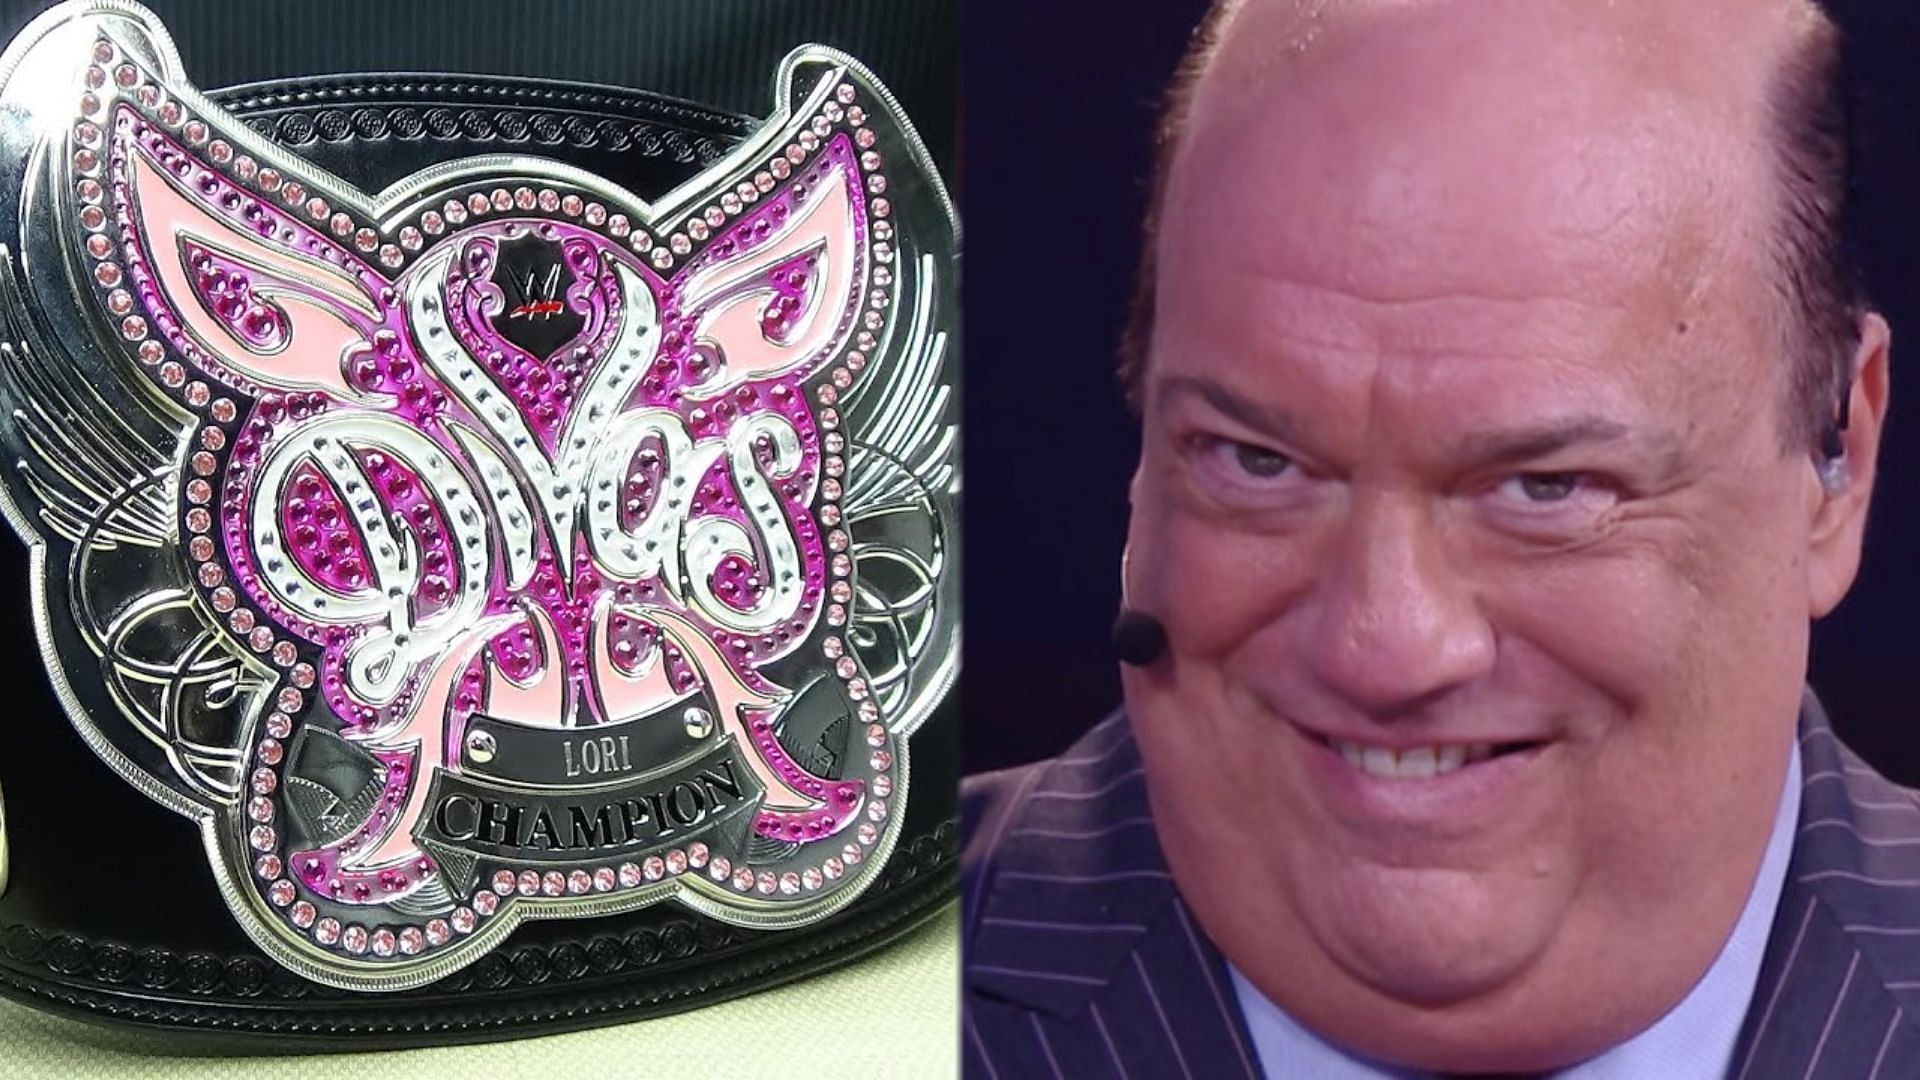 Could this star have been the first ever &quot;Paul Heyman girl?&quot;